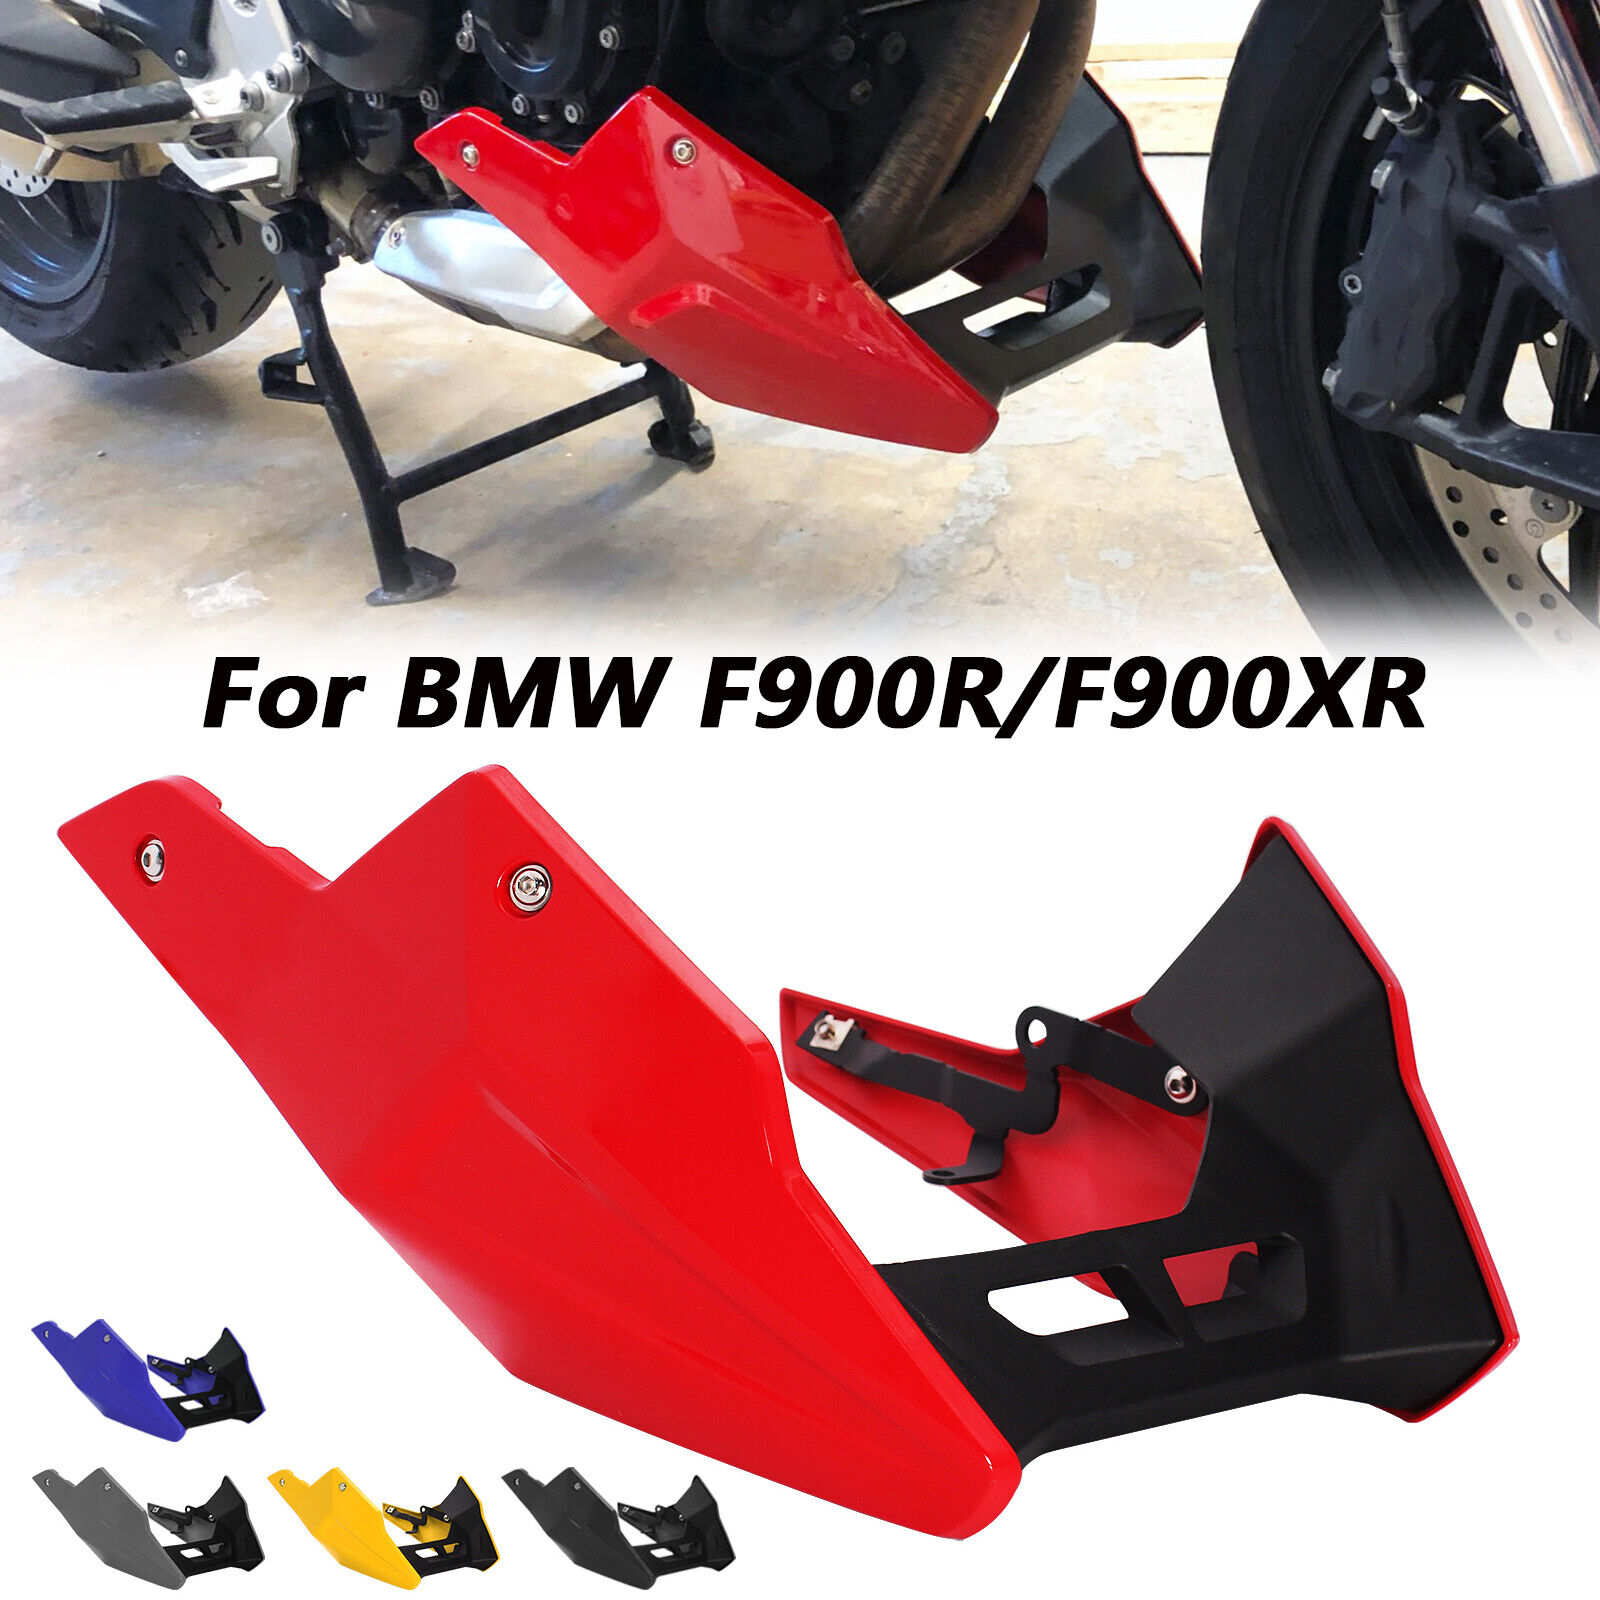 For BMW F900R/XR 20-21 Chassis Cover Engine Spoiler Lower Fairing Exhaust  Guard